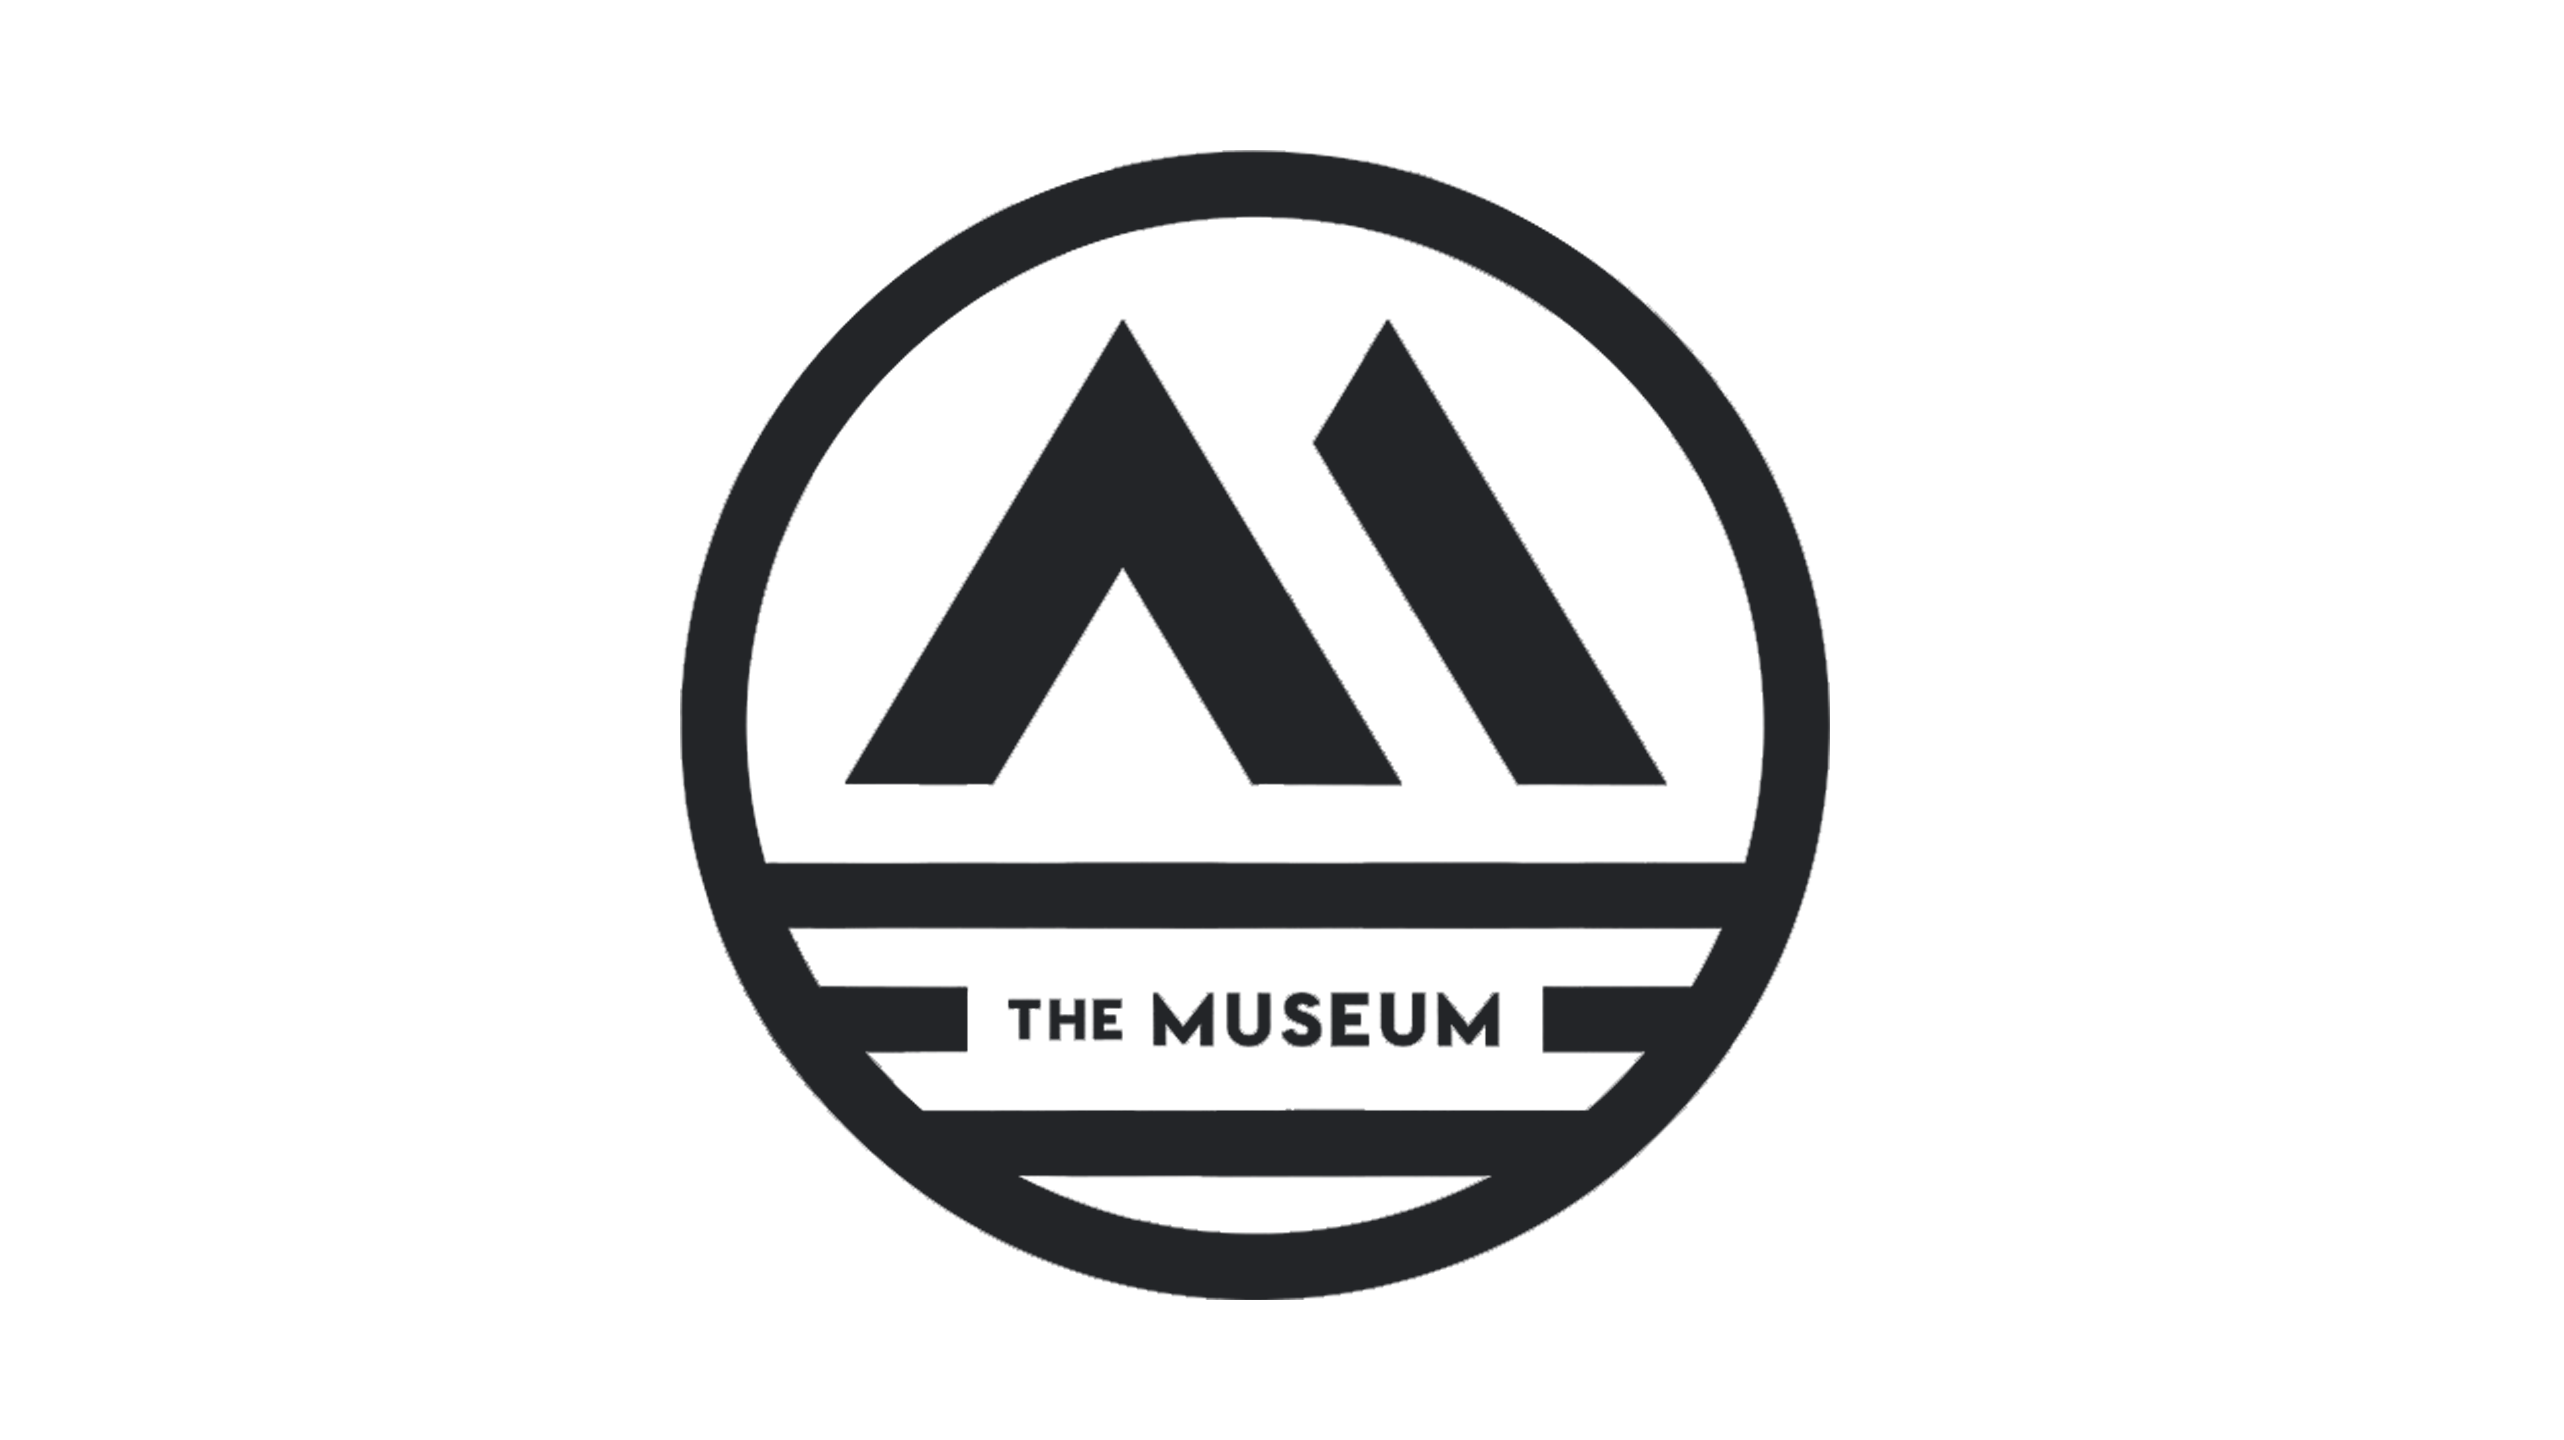 http://themuseummusic.com/wp-content/uploads/2019/05/different-museum-logoblack4.png